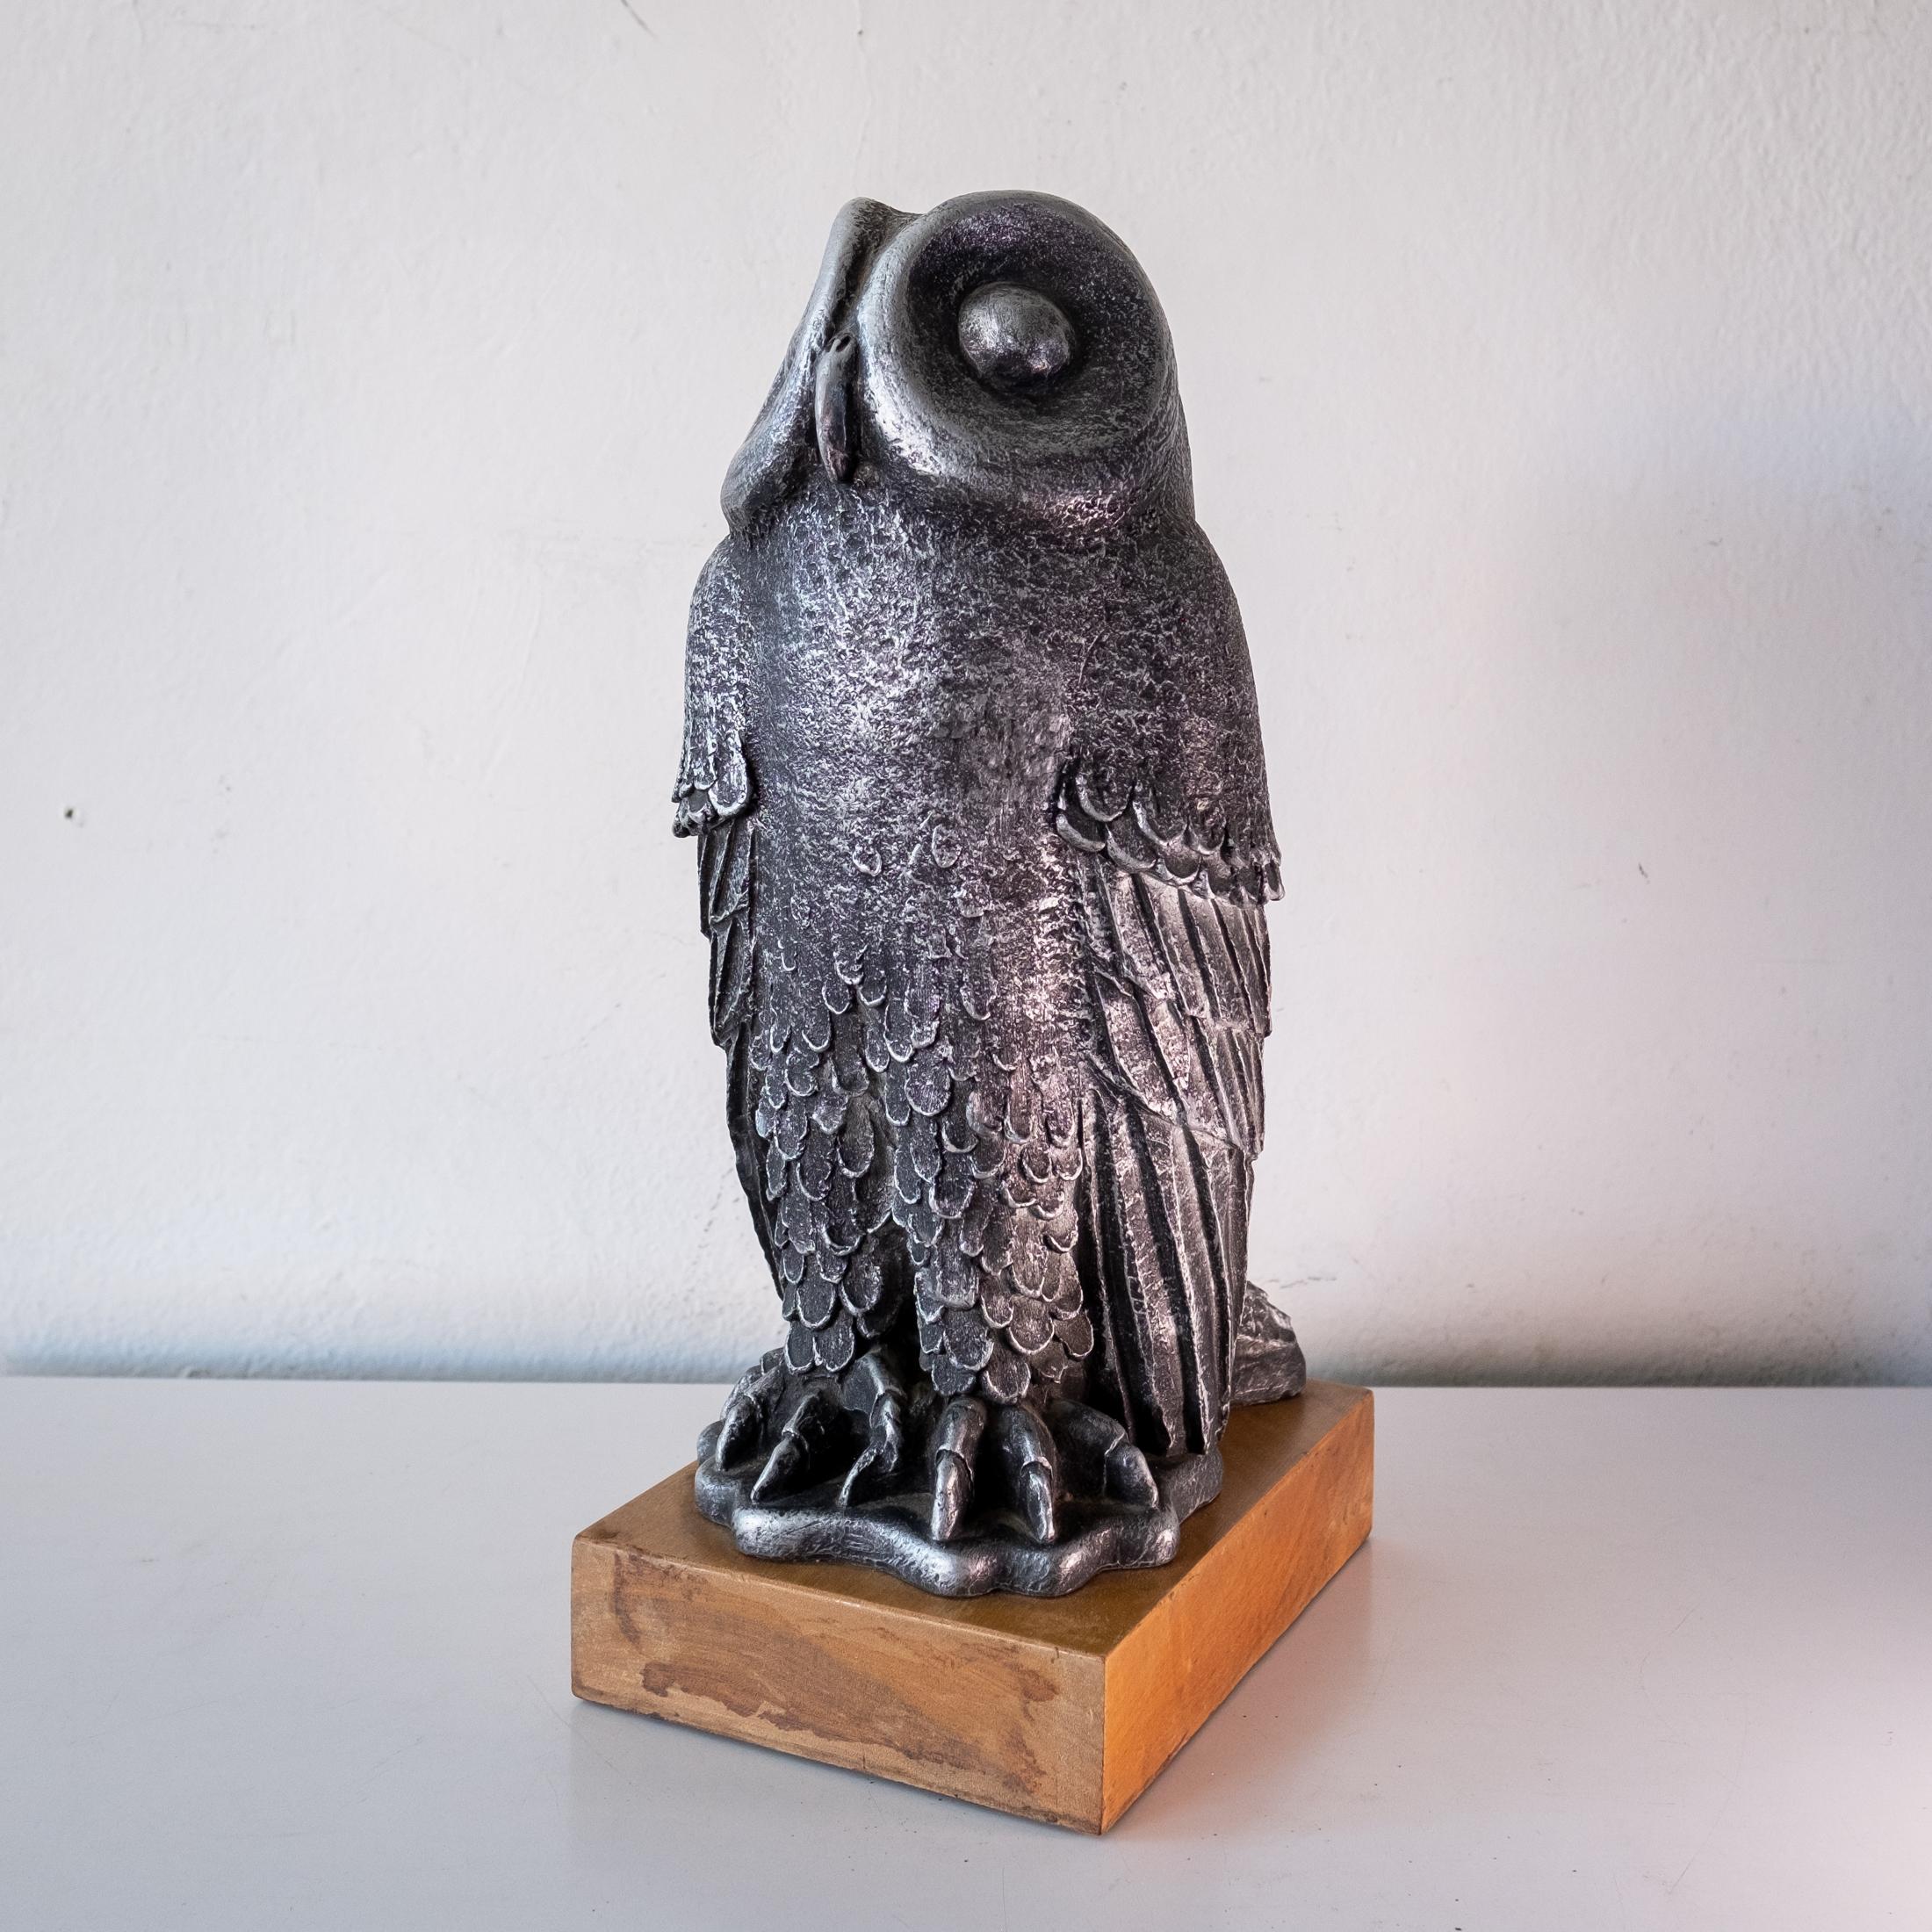 Mid-century owl sculpture by Paul Ballardo for Austin Enterprises. Large scale table top or mantle piece. Resin casted with a wood base. United States, 1971.
 